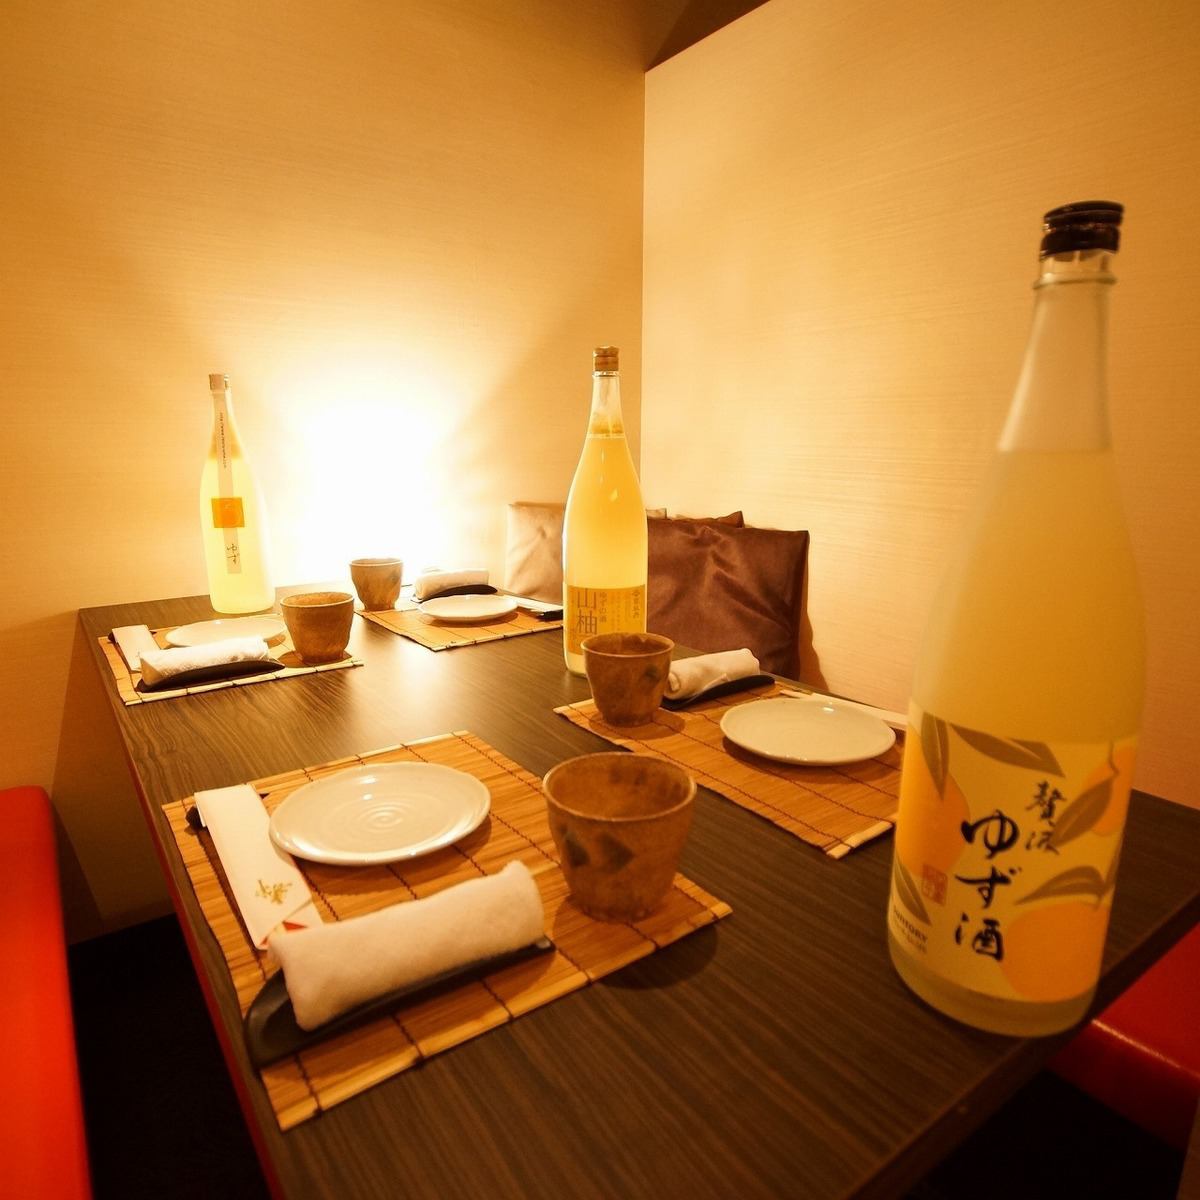 Private room with yuzu dishes♪ All-you-can-drink course from 3,850 yen!